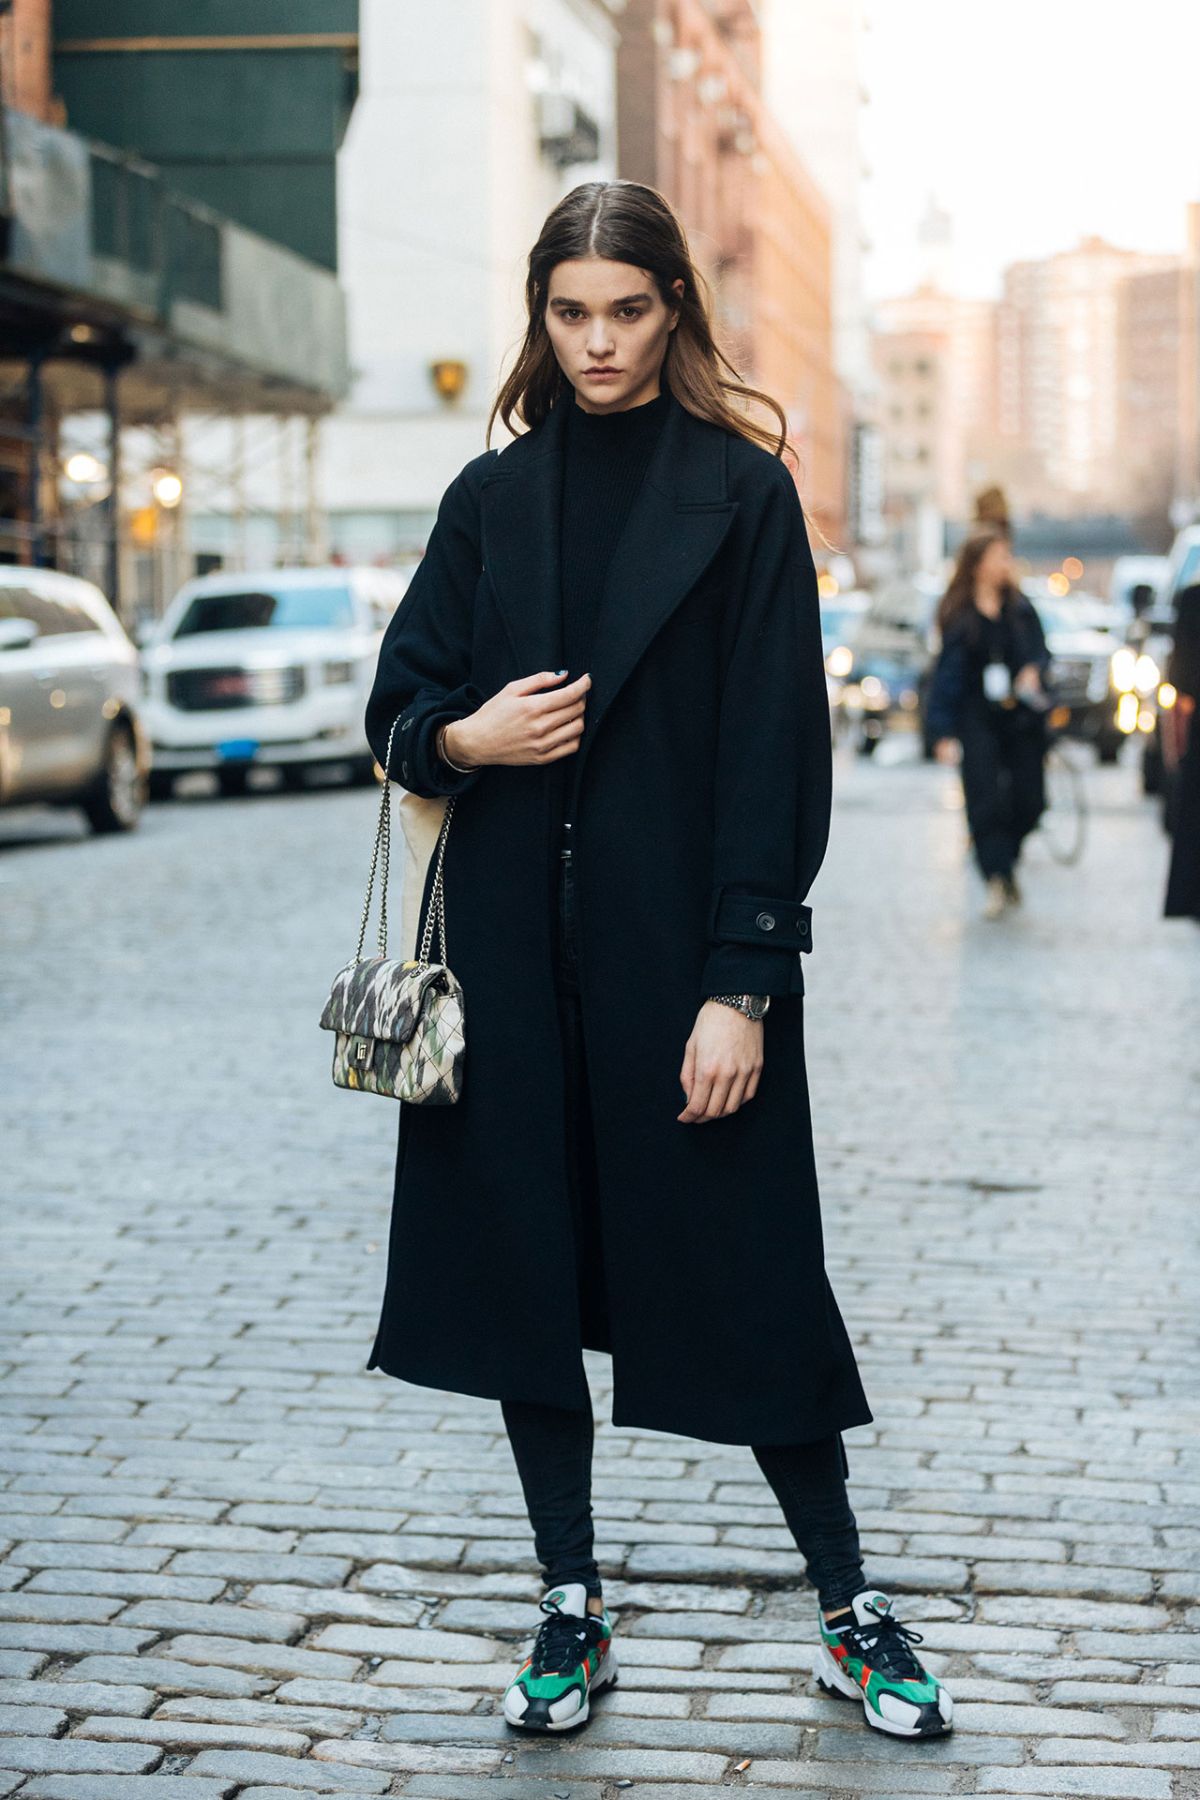 Street Style at New York Fashion Week Fall-Winter 2020 - Street Style